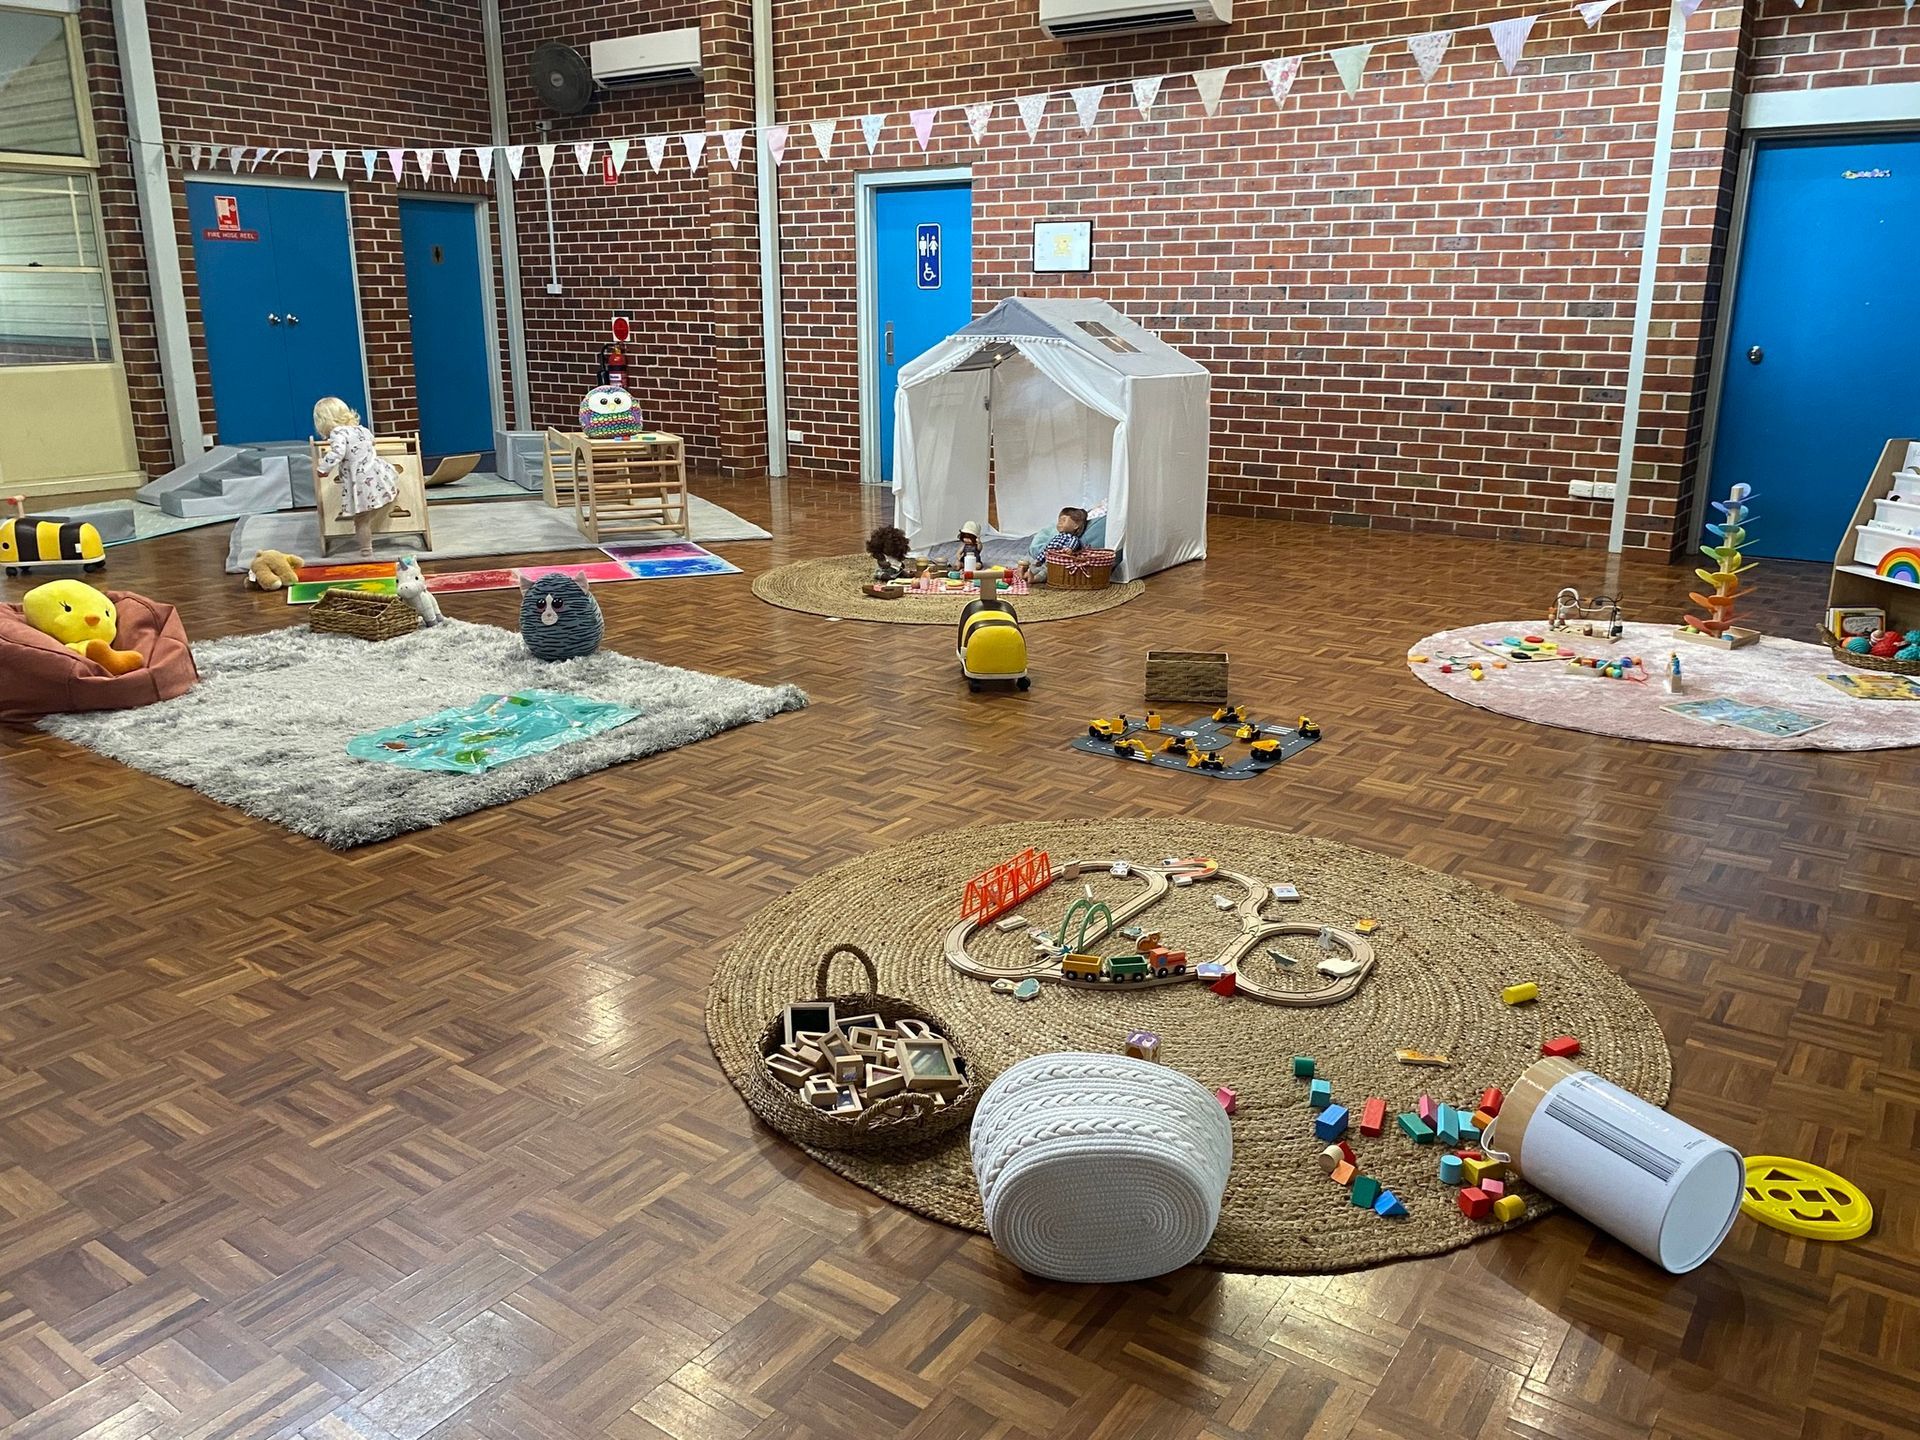 Children's playroom with various toys for role playing — The Happy Human Hub